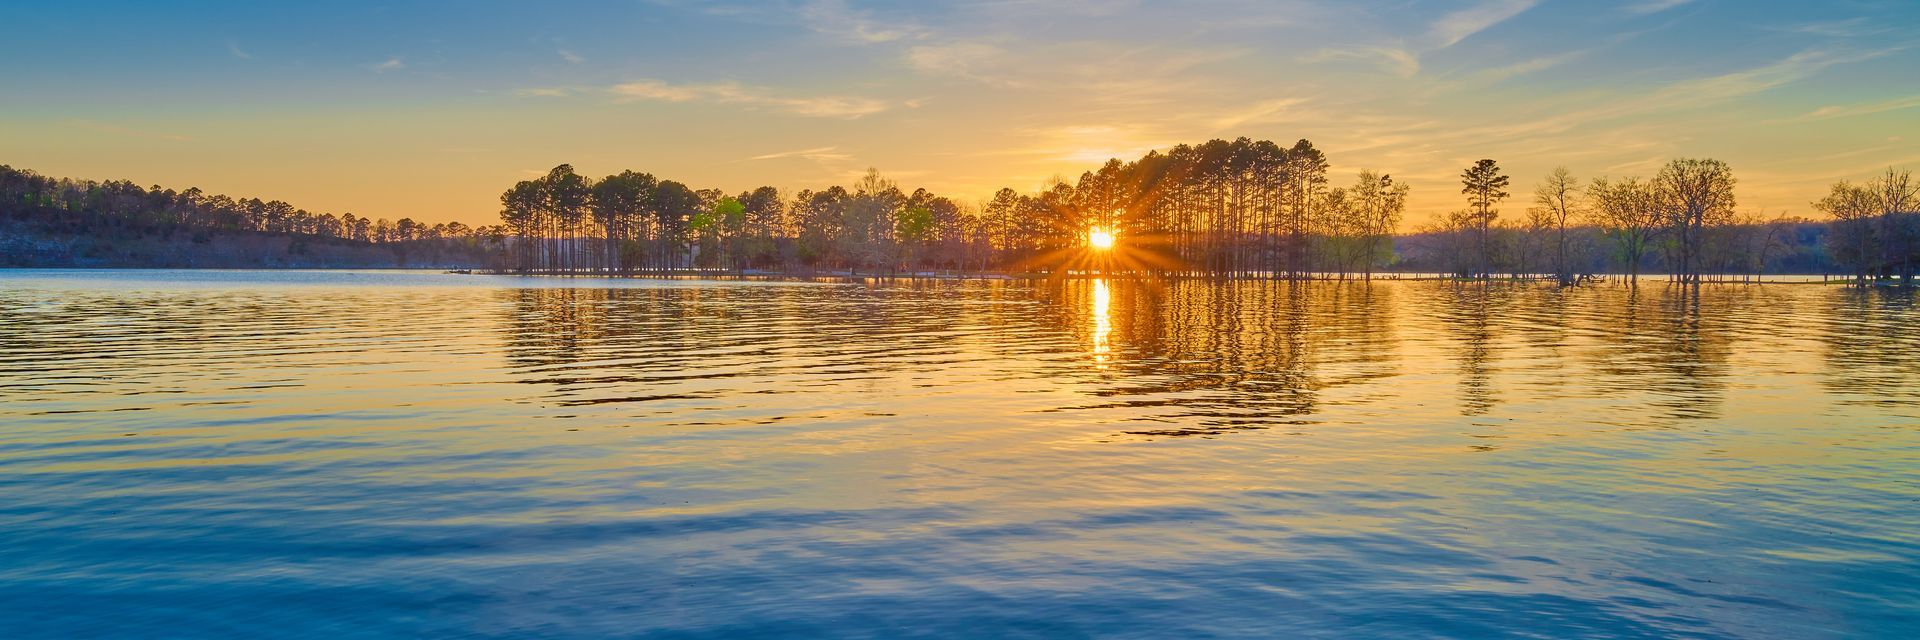 the sun is setting over a lake with trees in the background .